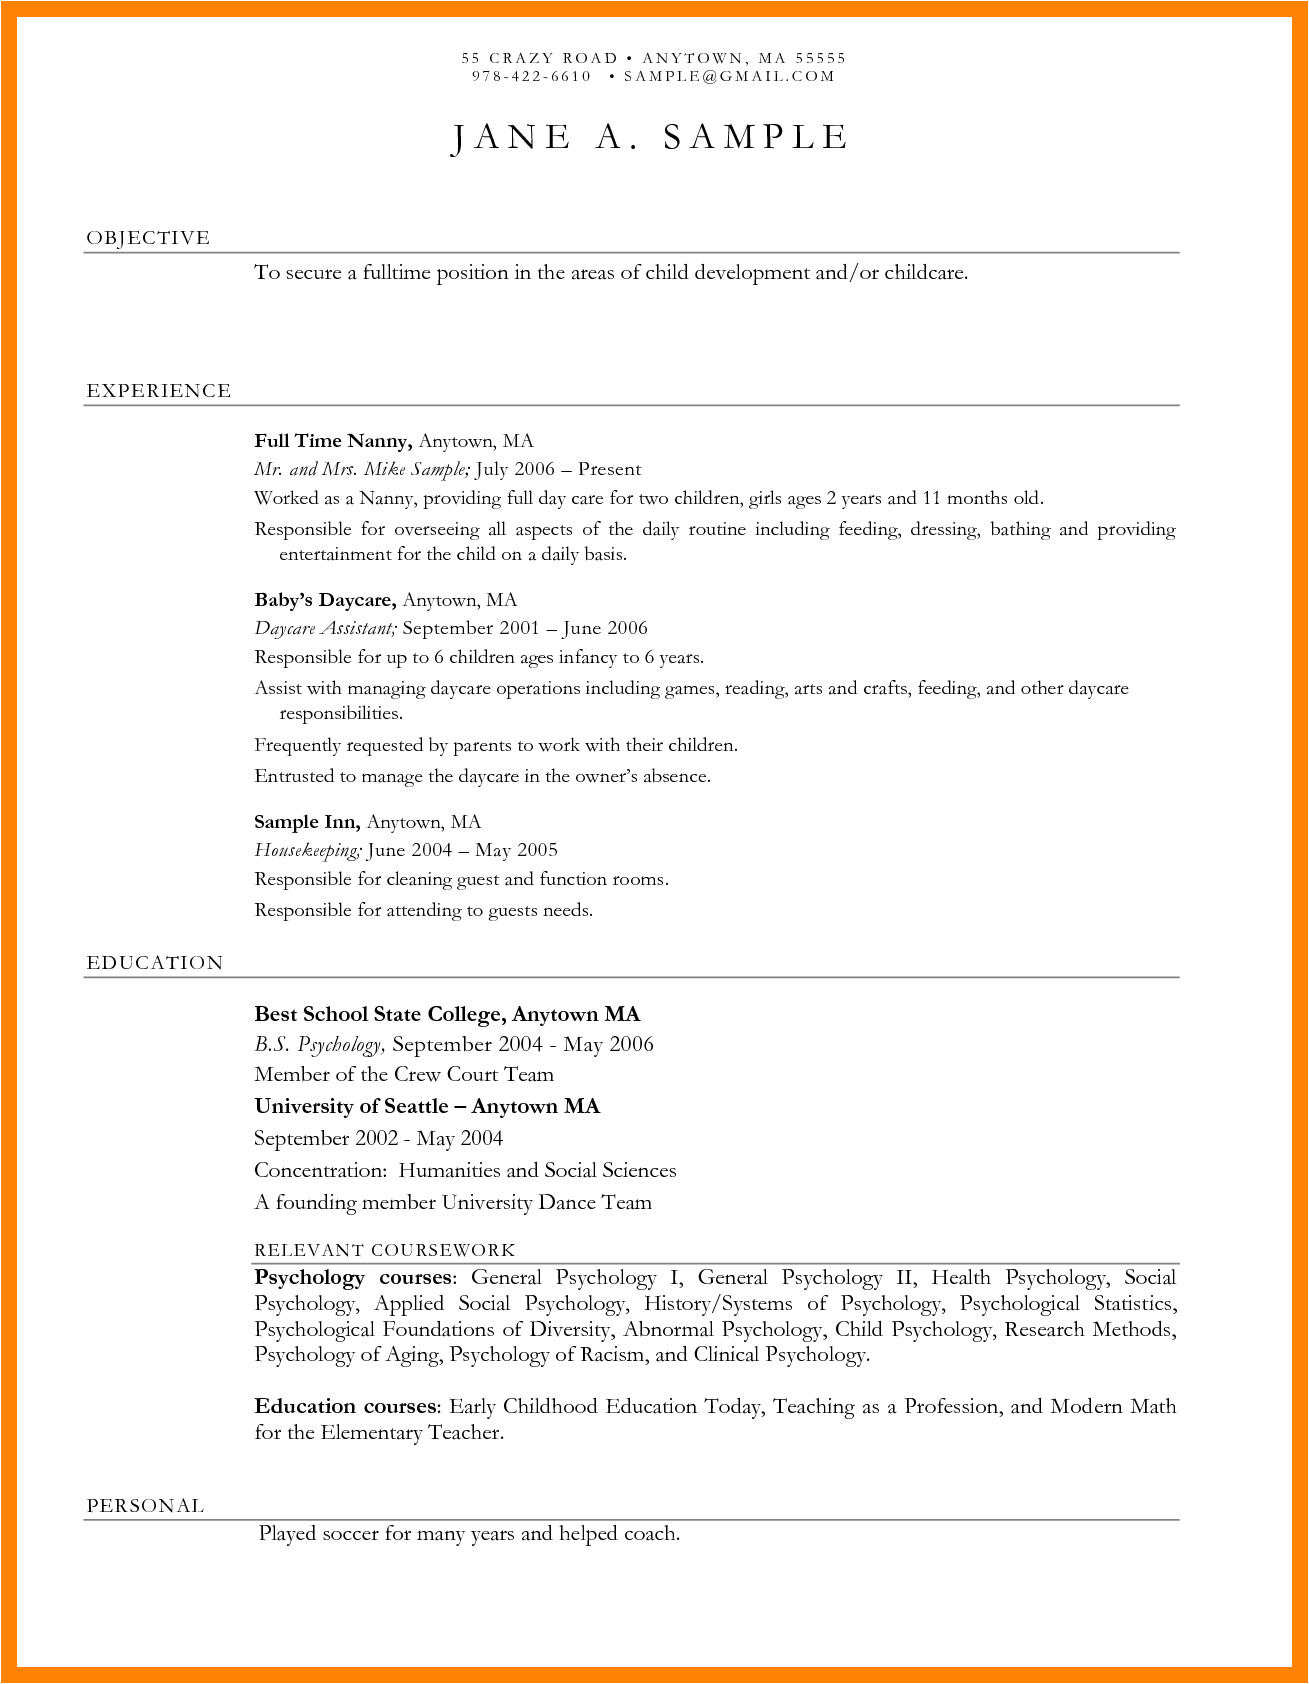 Cover Letter for Daycare Worker No Experience | williamson ...